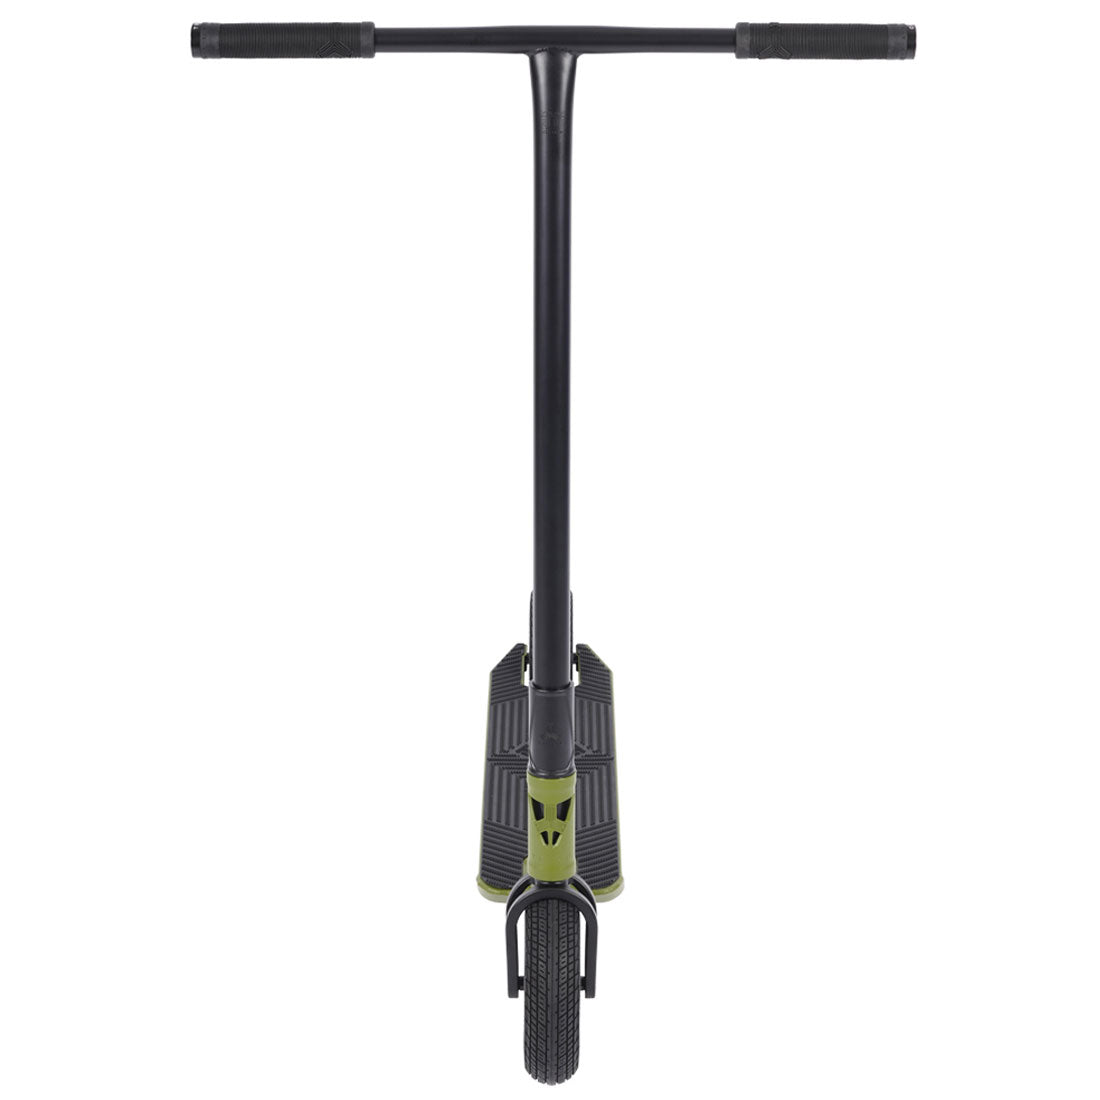 Triad CD152 Shape Shifter Dirt Scooter - Matte Green/Black Scooter Completes Dirt and Snow